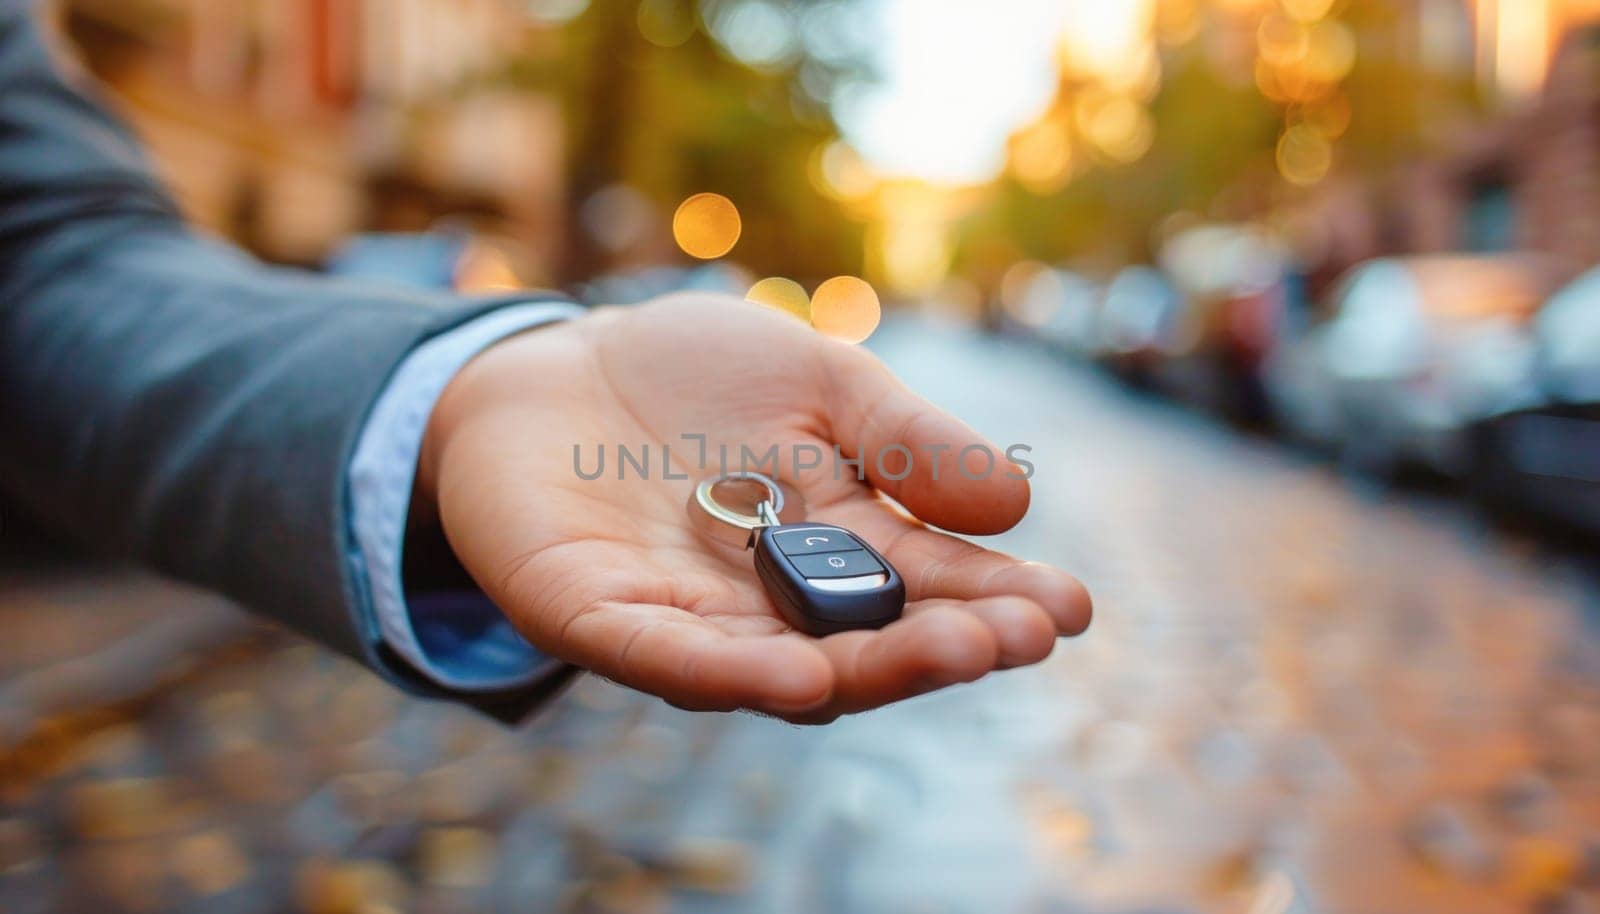 The man in a suit displays a sophisticated gesture while holding a car key in his hand, showcasing elegance and style